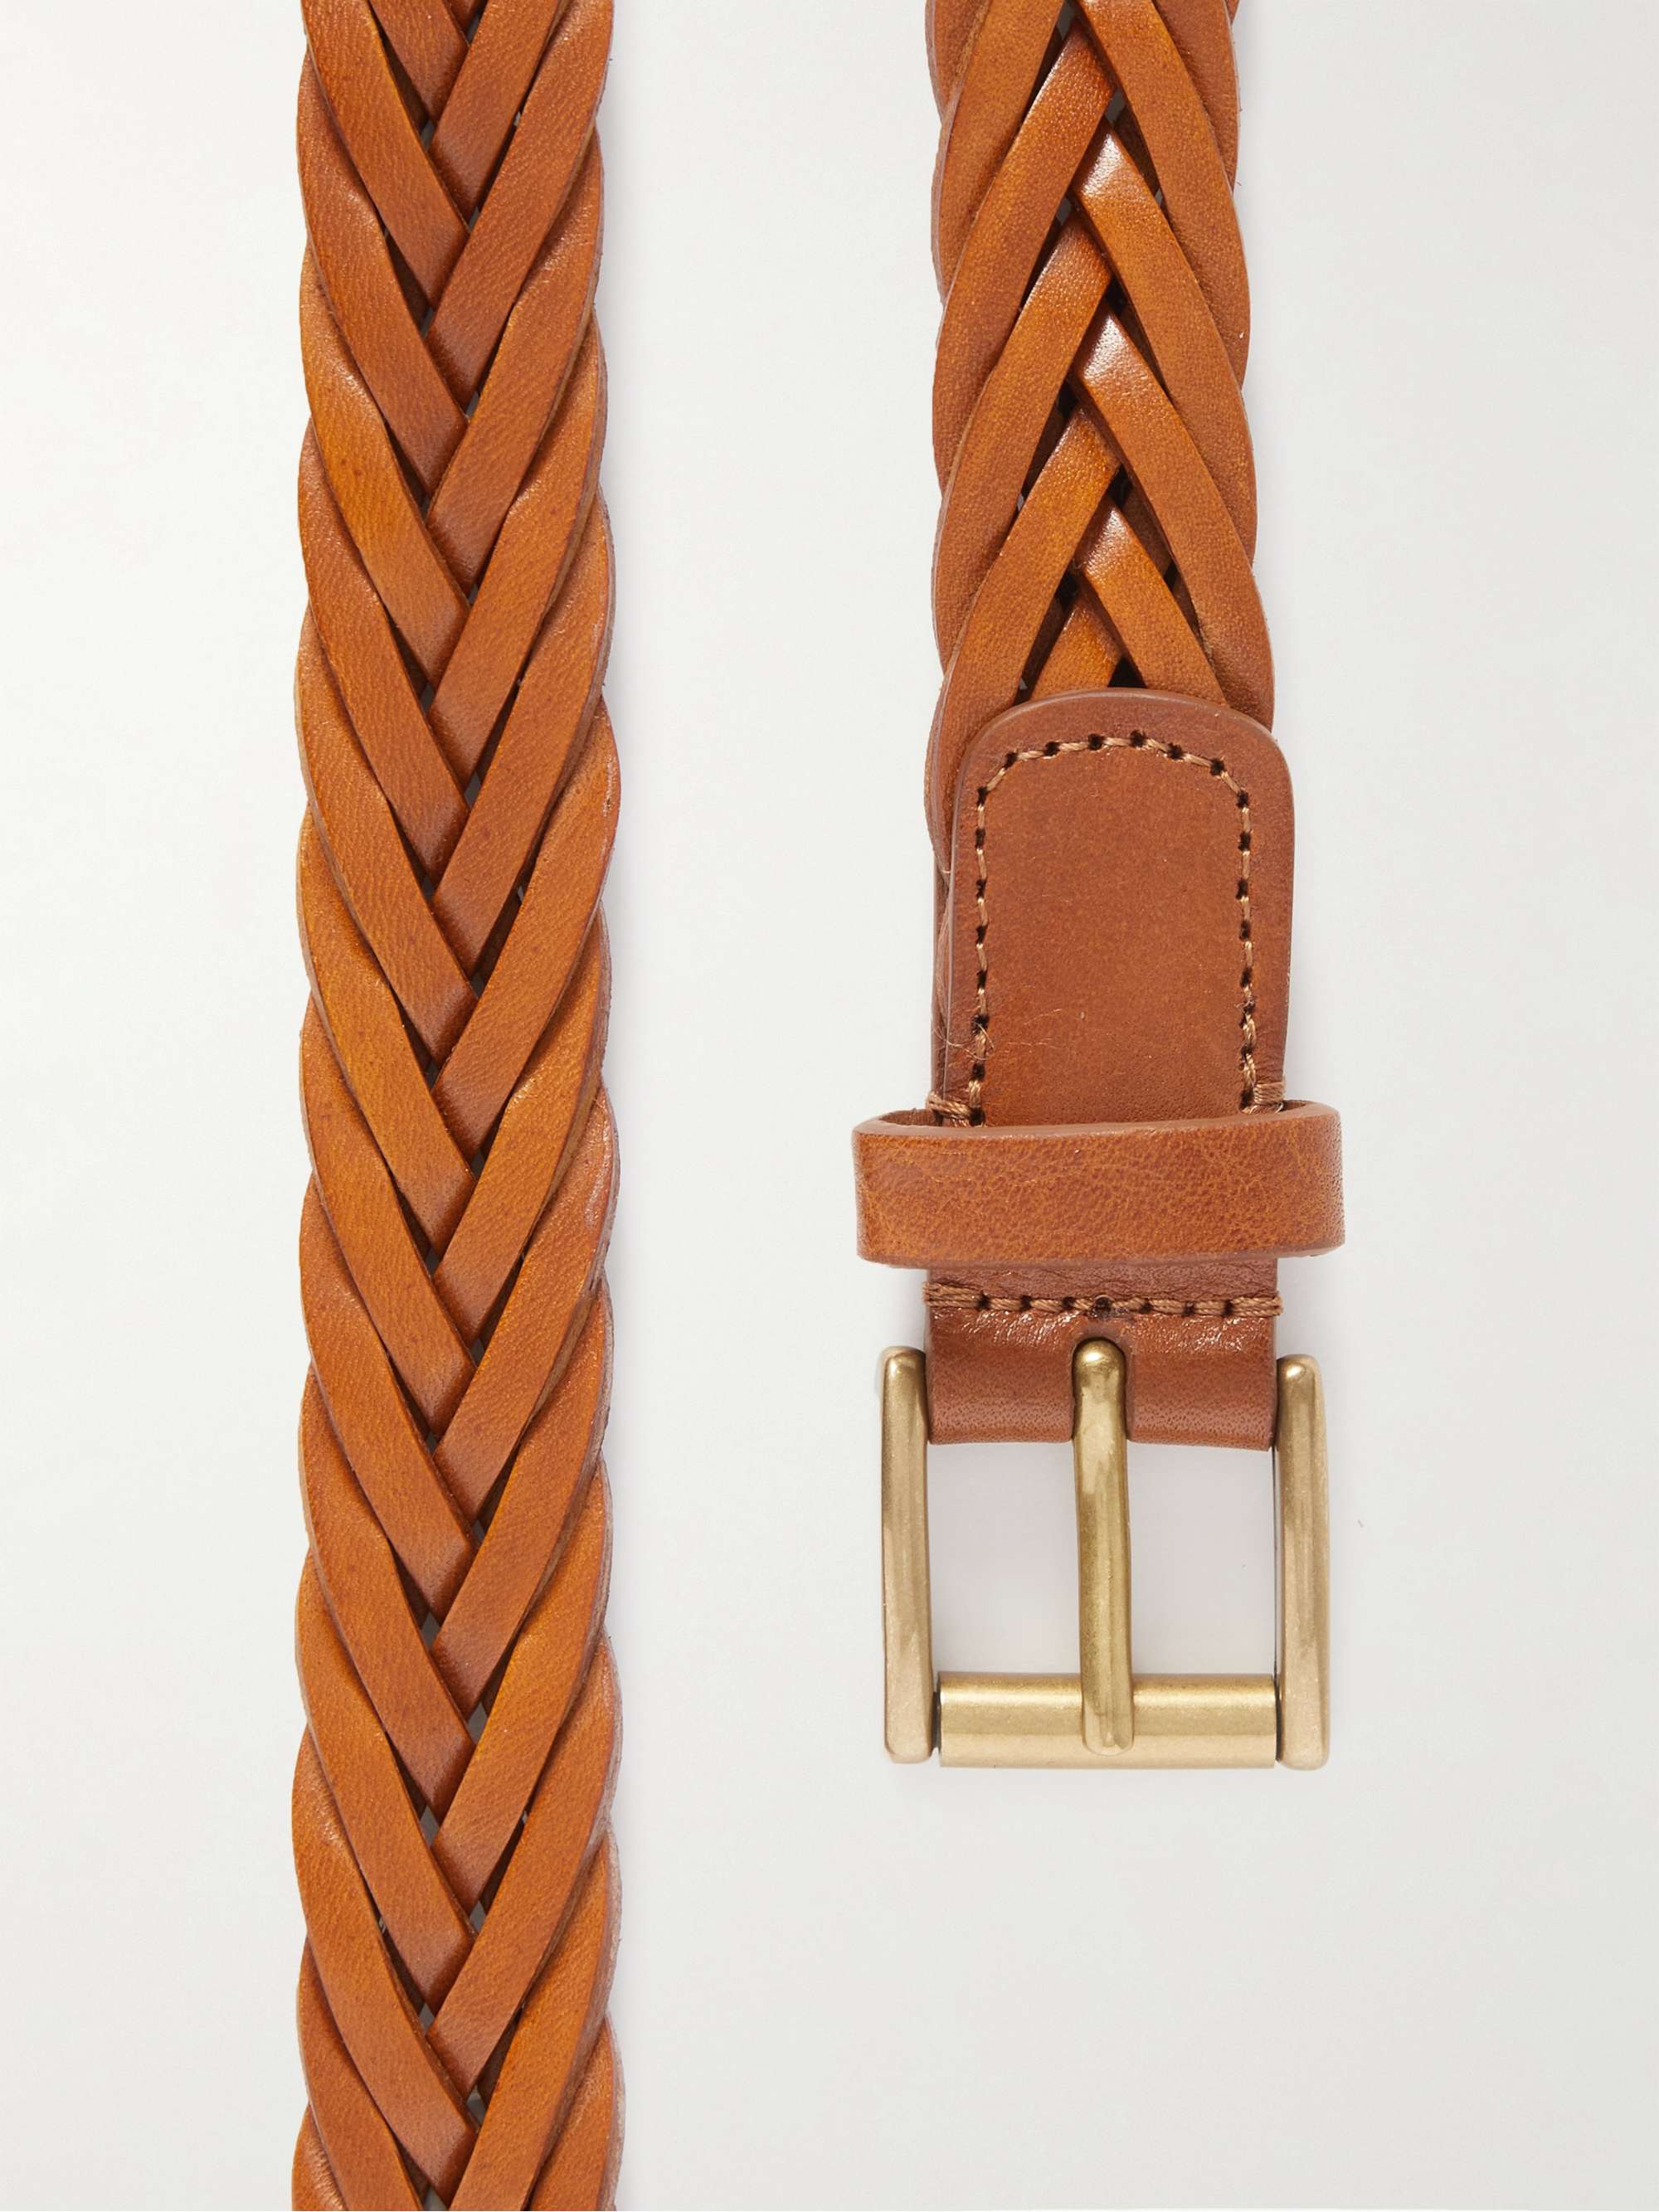 ANDERSON'S 2.5cm Woven Leather Belt